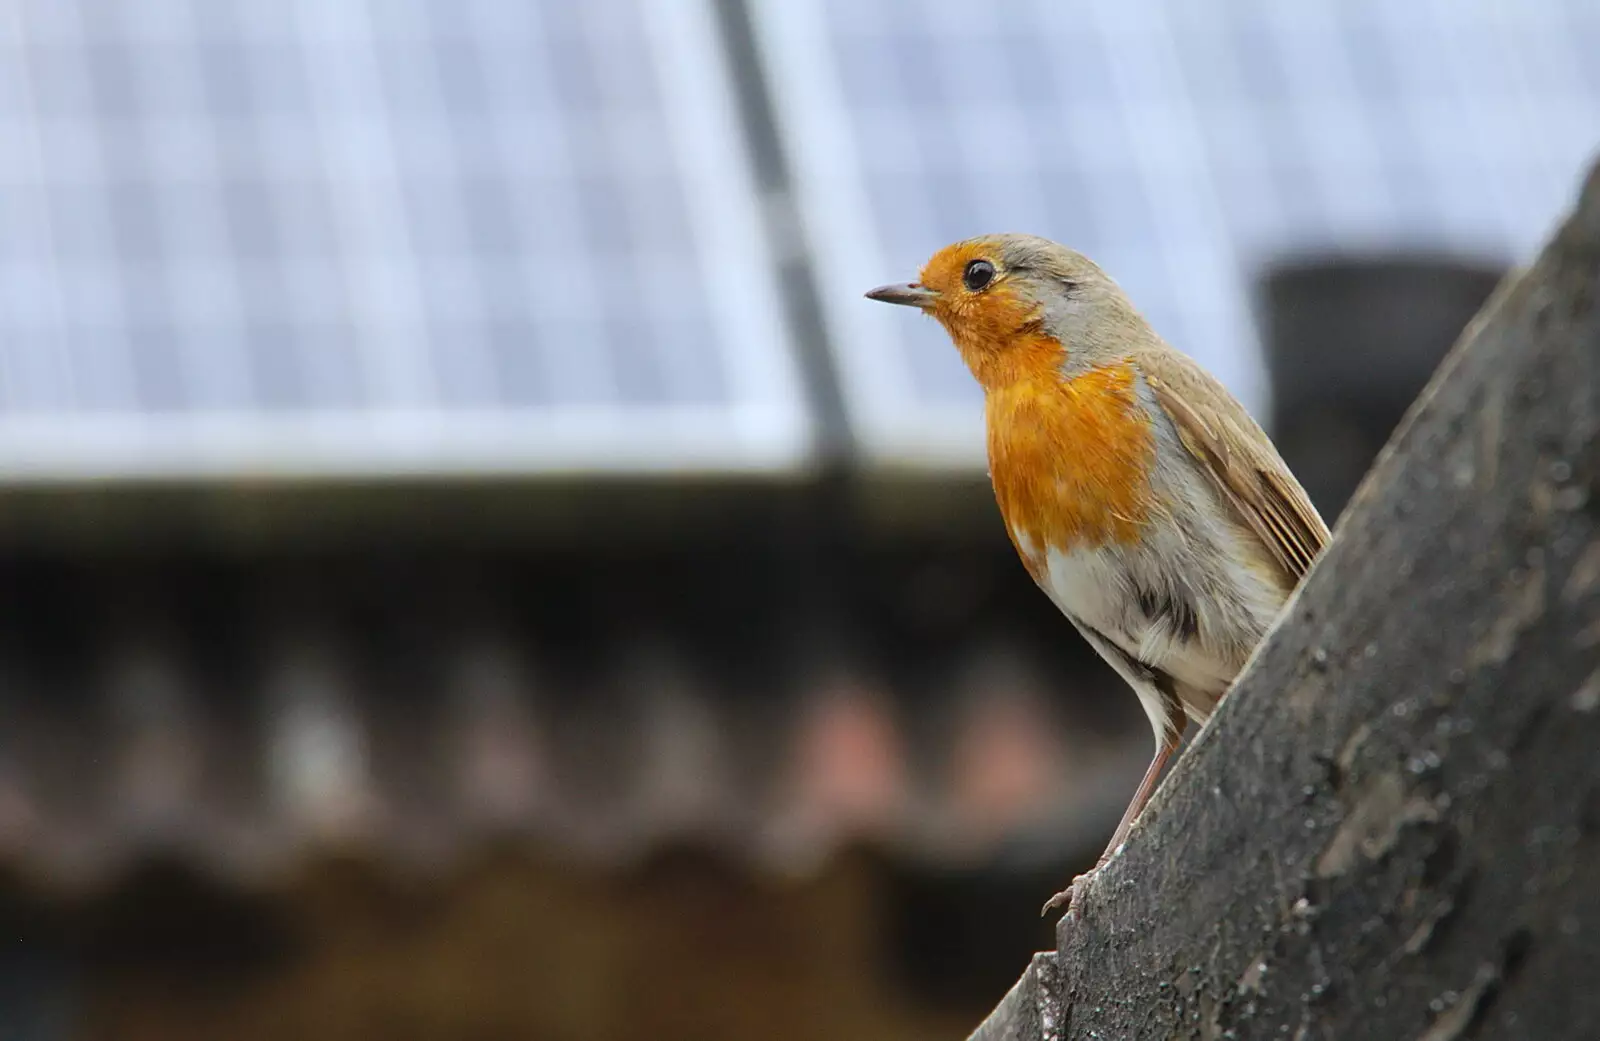 A robin flits about looking for crumbs, from Chagford Lido and a Trip to Parke, Bovey Tracey, Devon - 25th May 2019